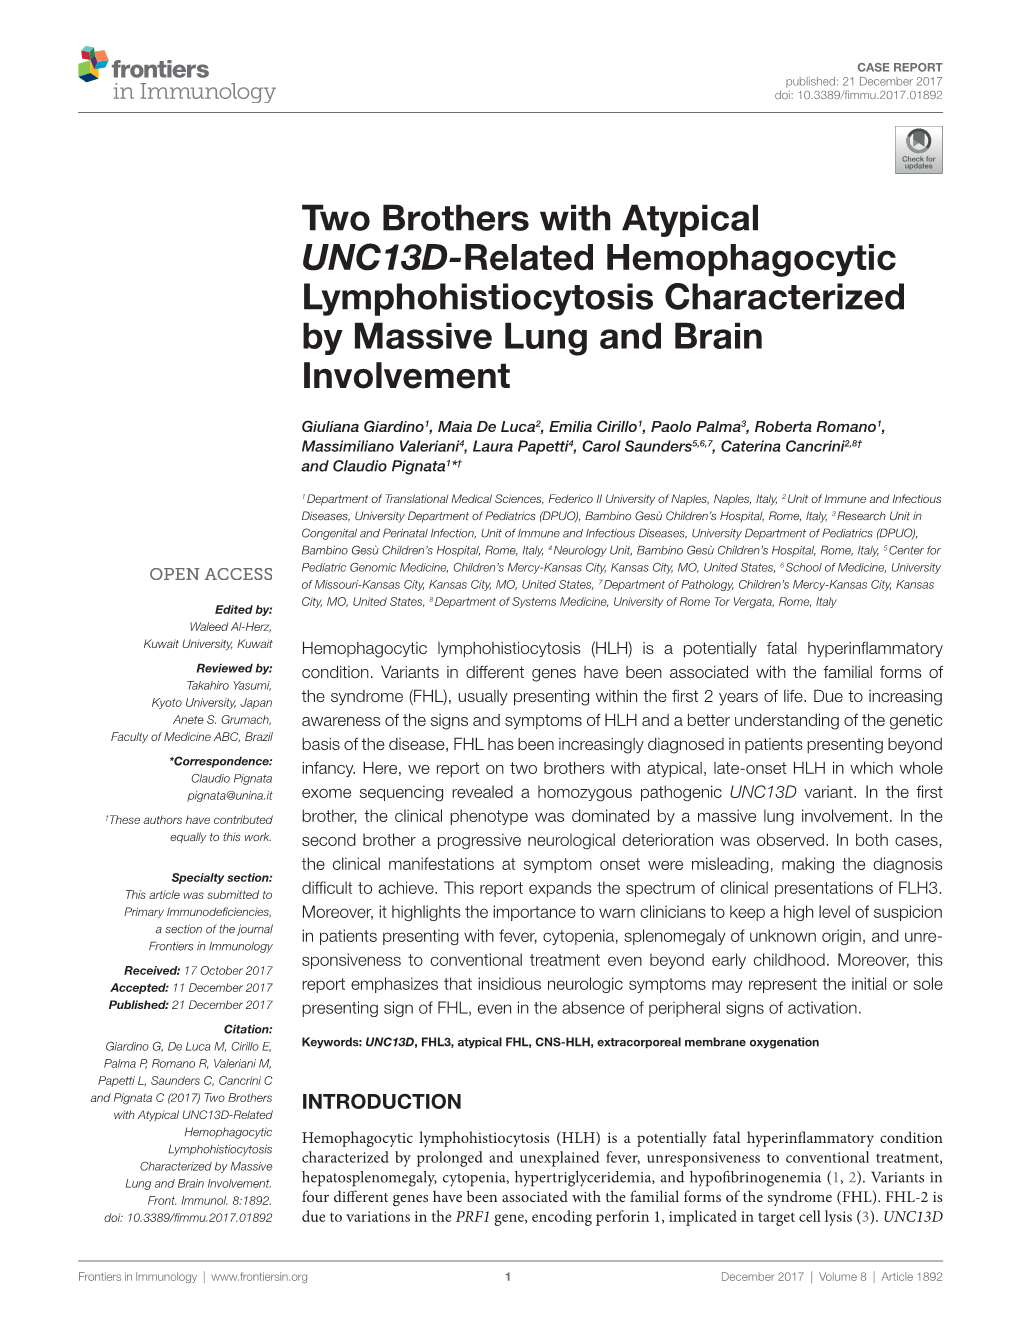 Two Brothers with Atypical UNC13D-Related Hemophagocytic Lymphohistiocytosis Characterized by Massive Lung and Brain Involvement